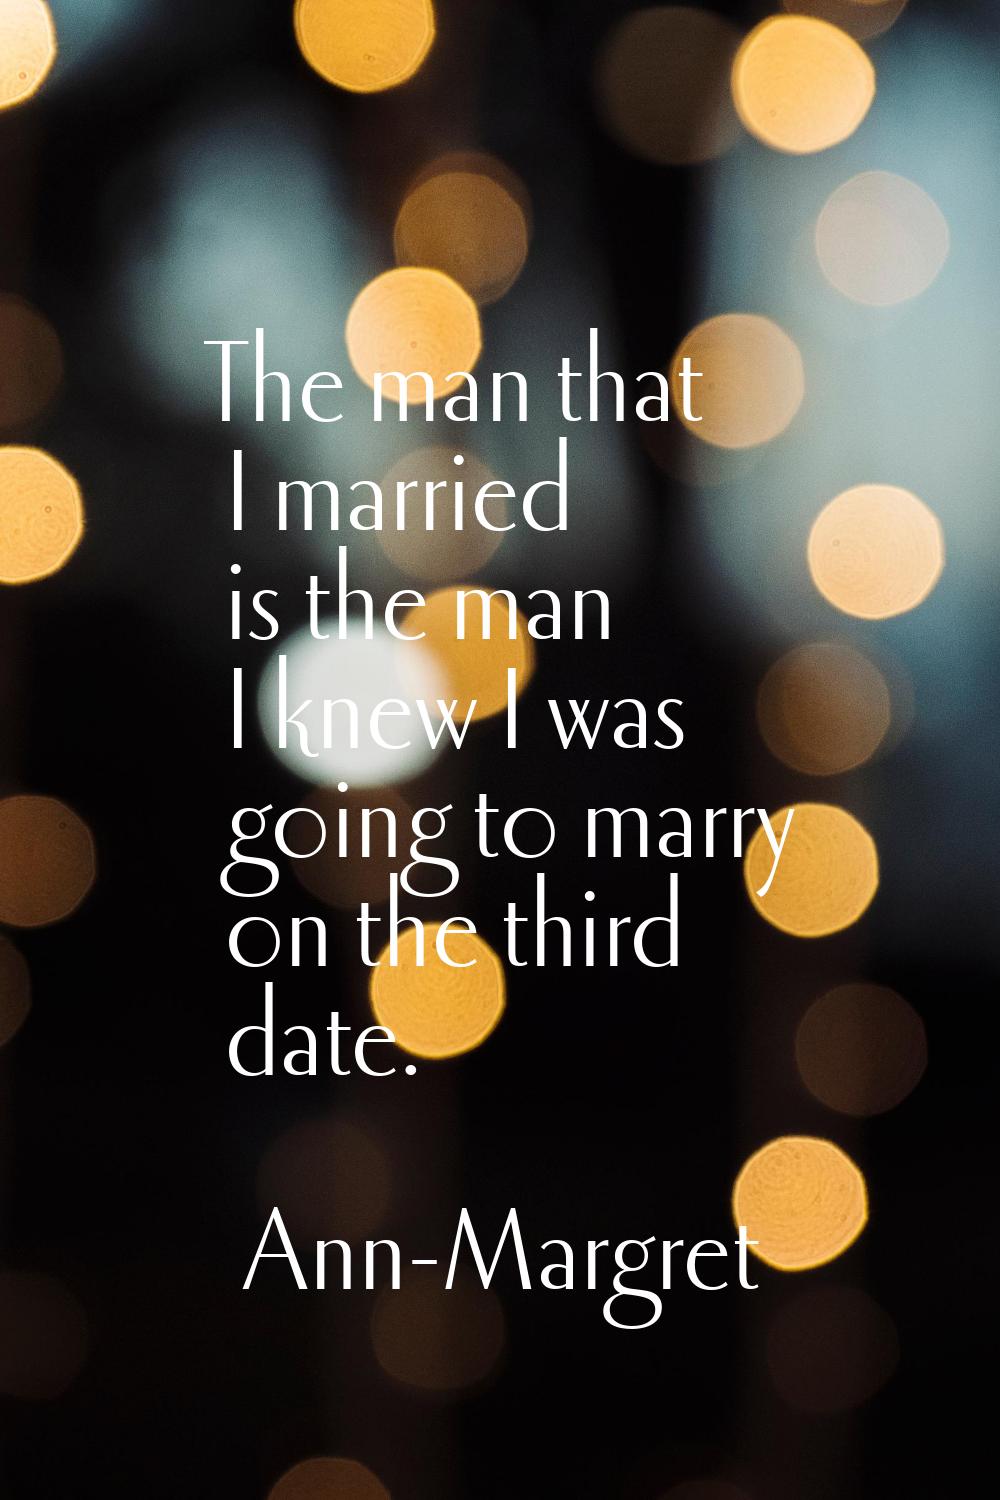 The man that I married is the man I knew I was going to marry on the third date.